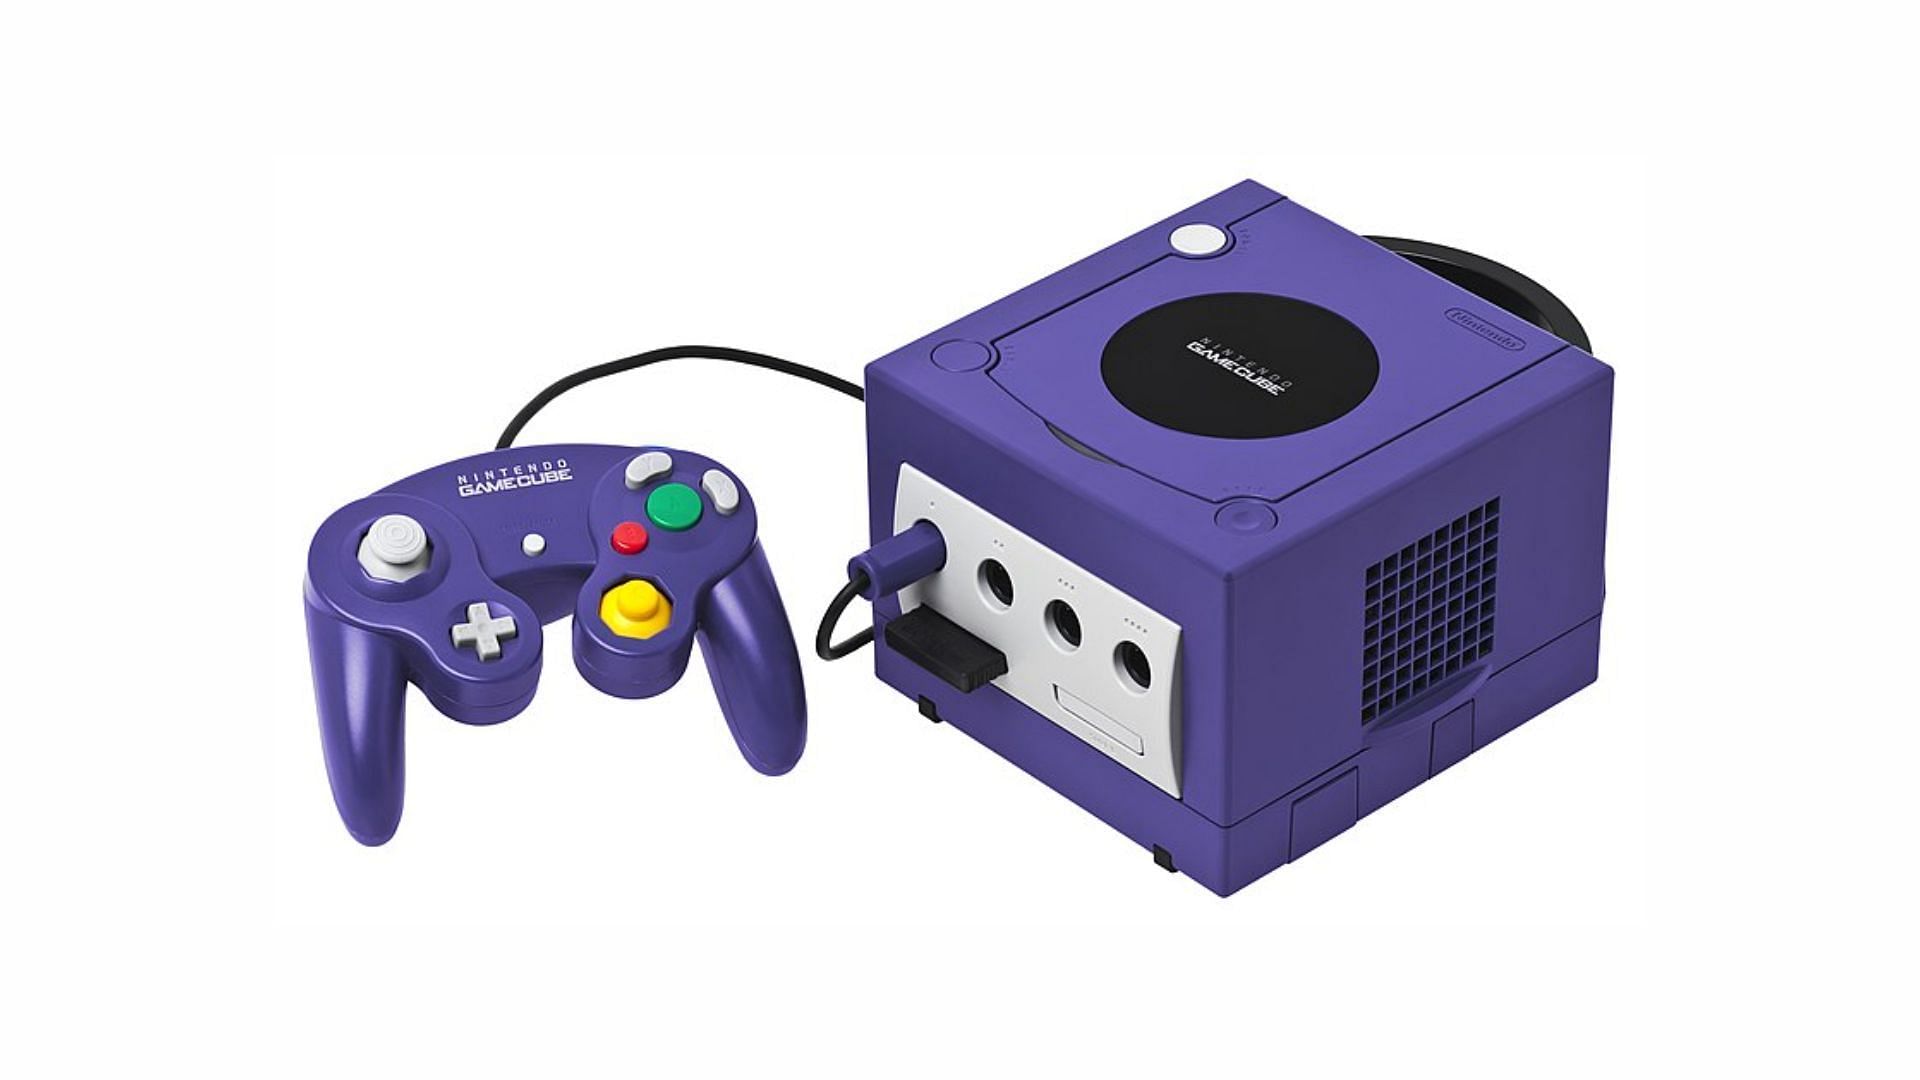 GameCube was praised for its C-stick controller and excellent first-party titles. (Image via Wikipedia)